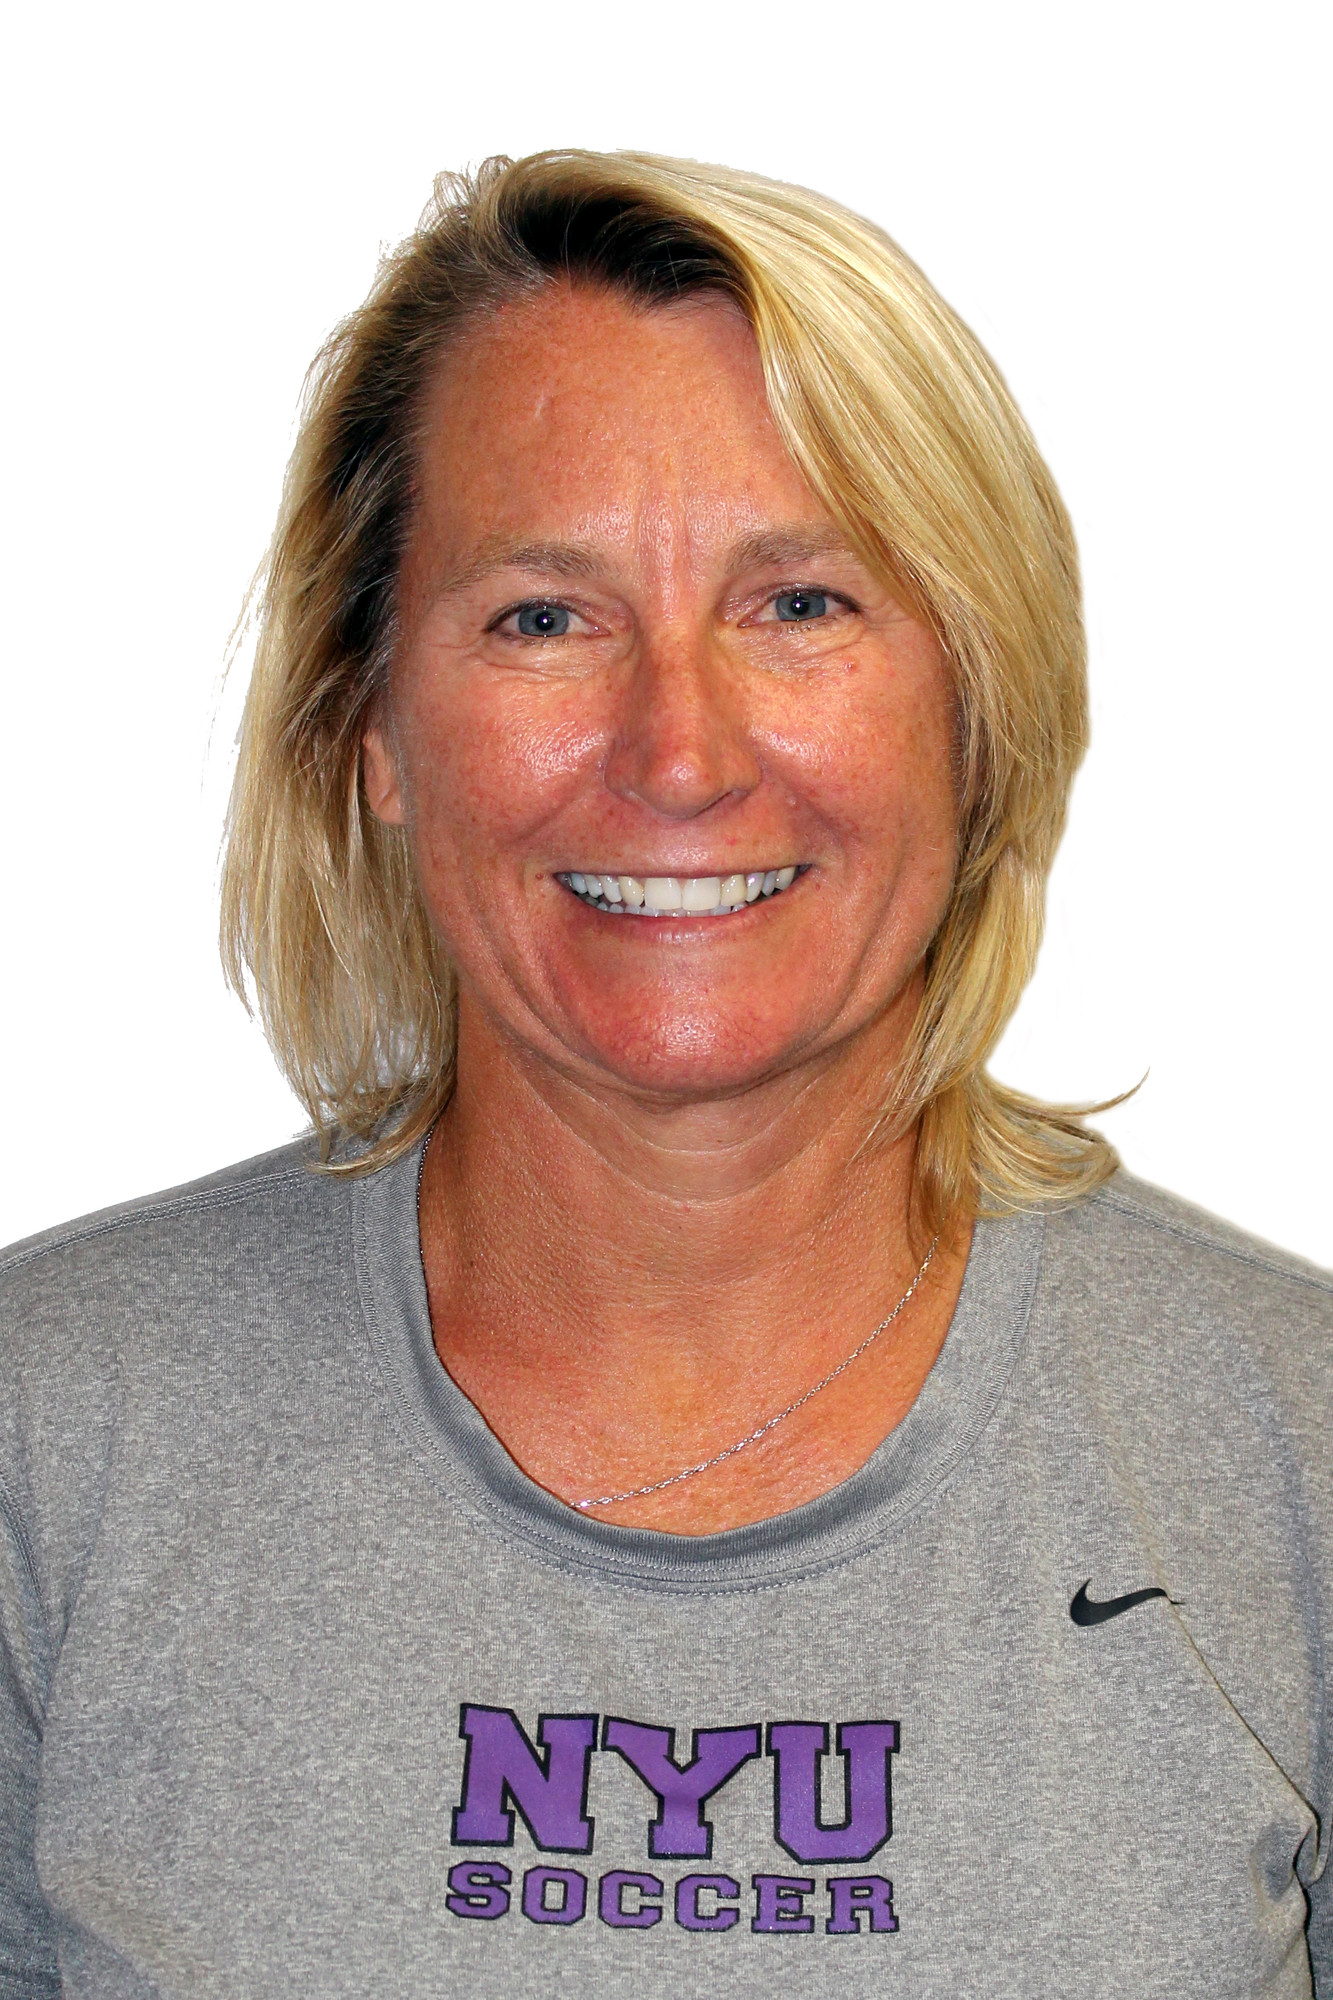 Wyant, who's now a coach, was the first goalkeeper for the U.S. women’s national soccer team.